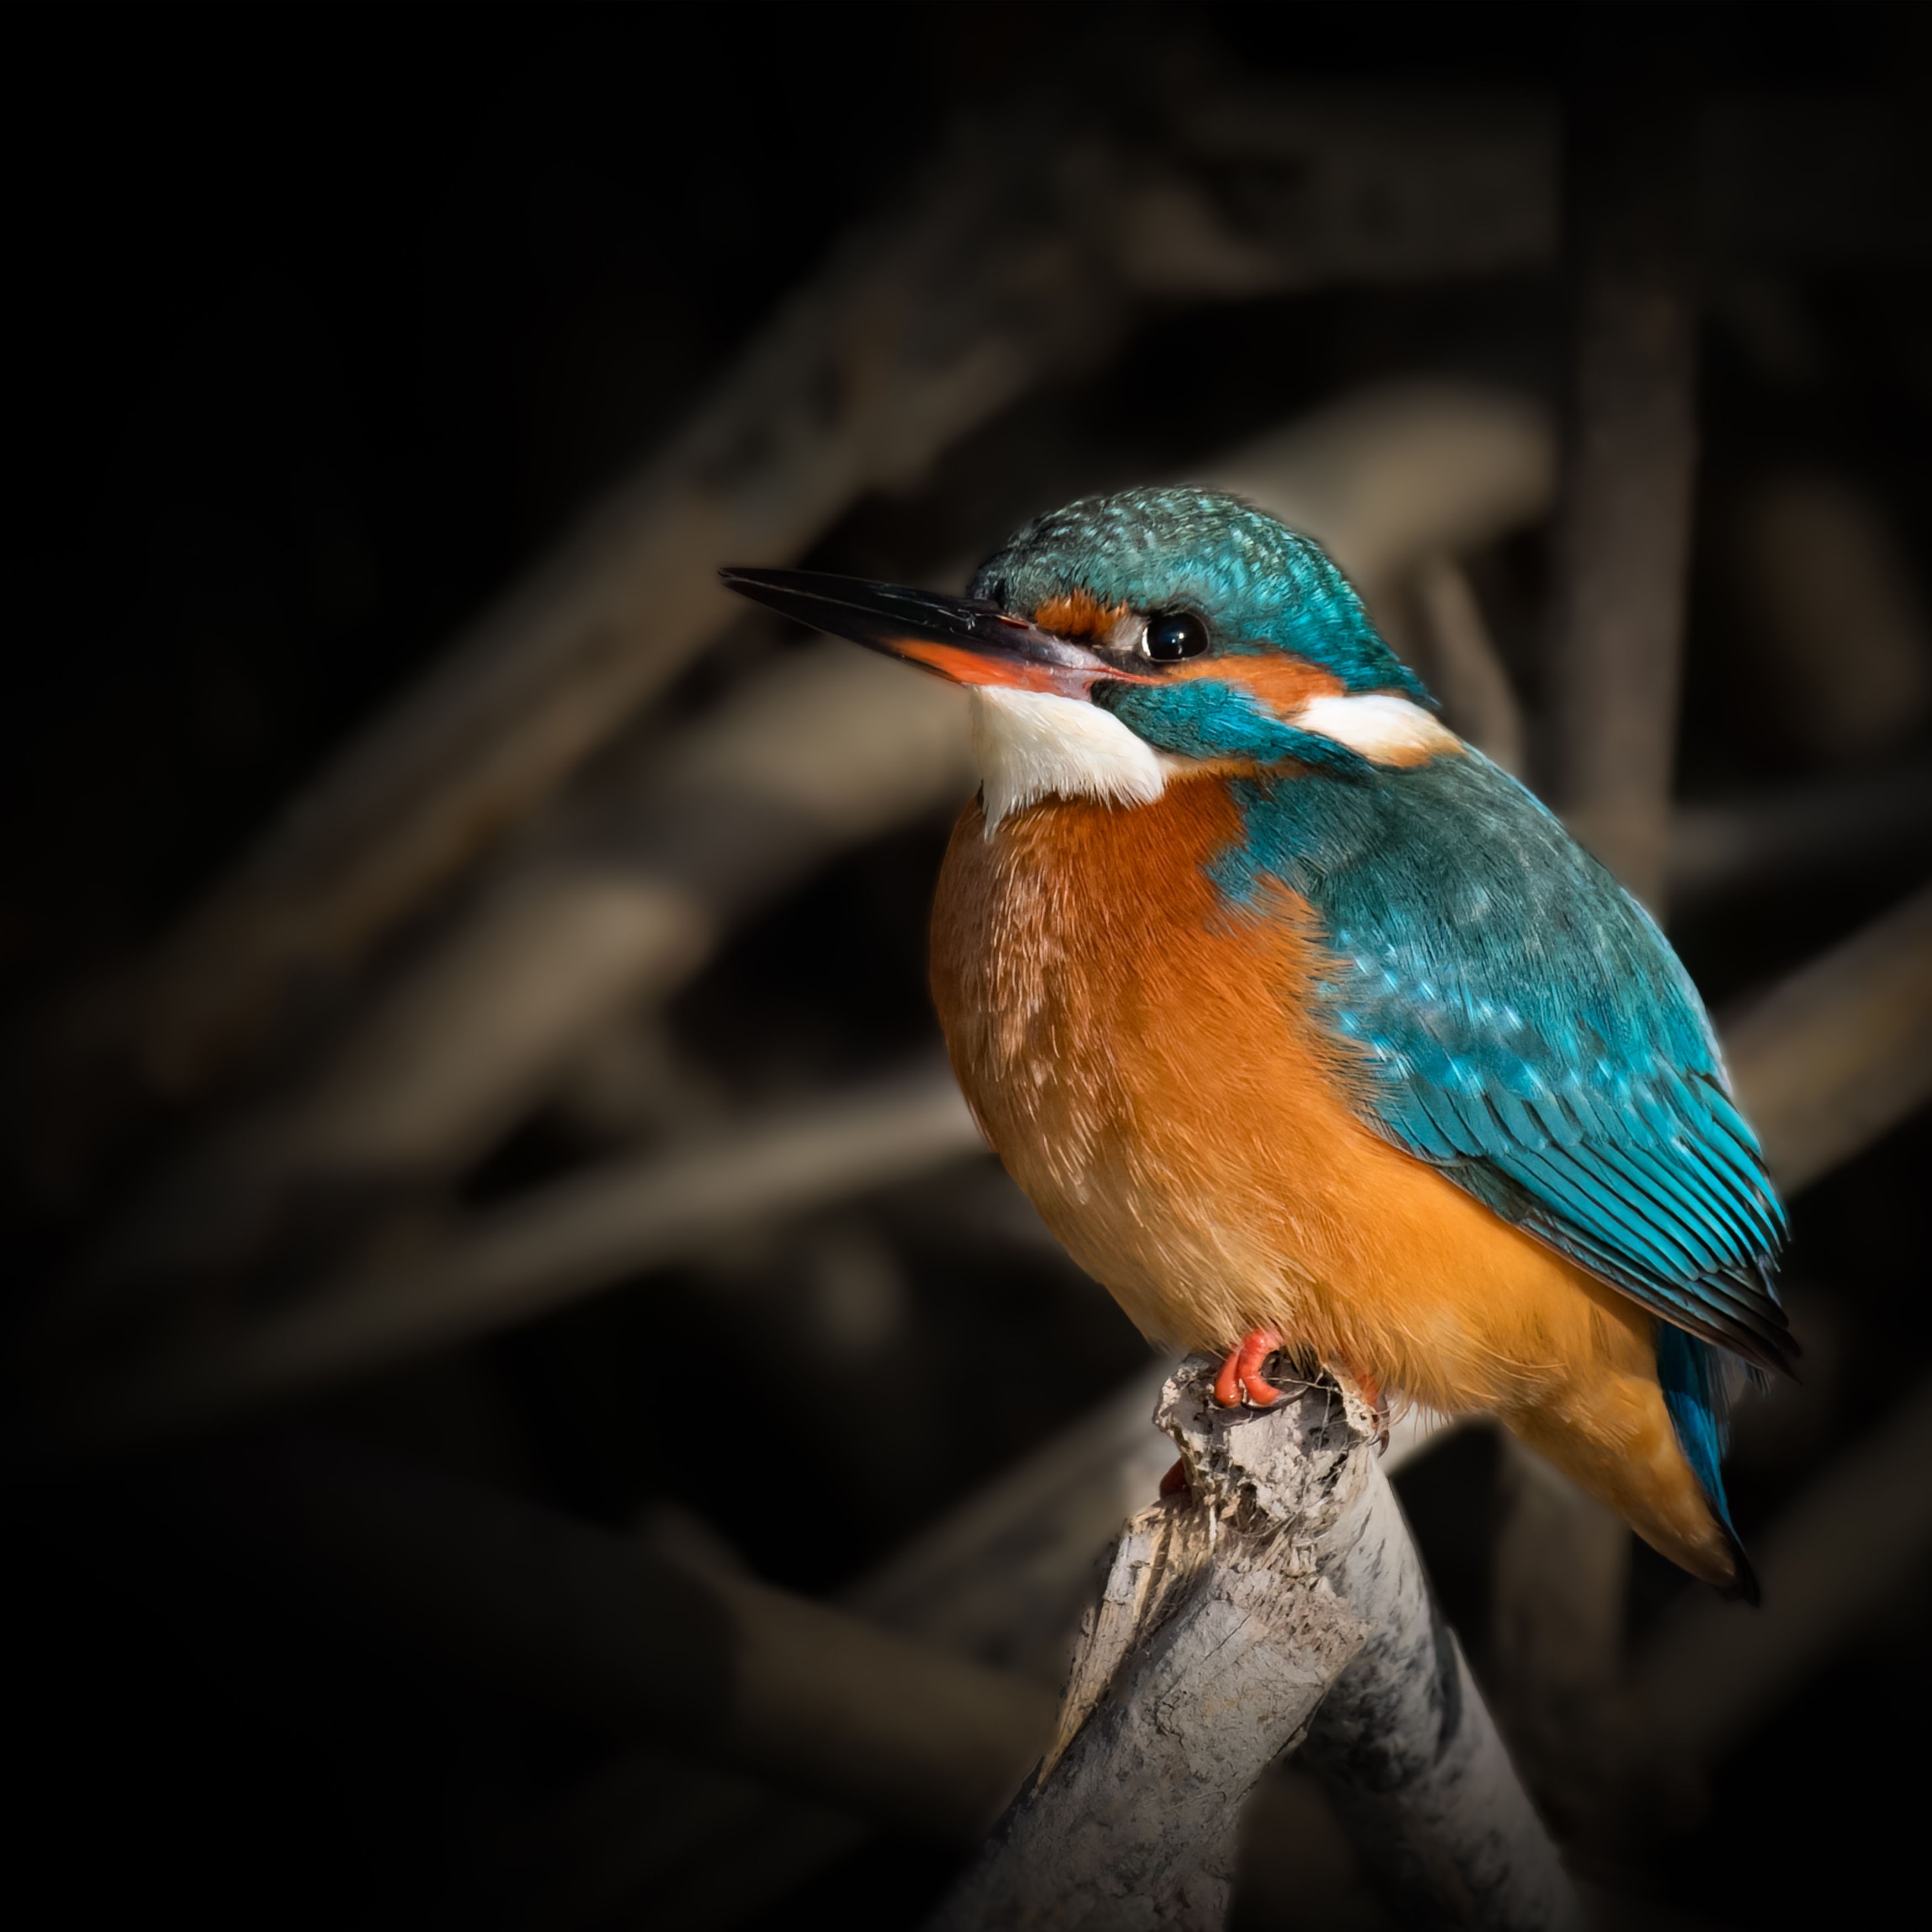 common kingfisher, kingfisher, bird, birds, animal, animals, wing, wings, feather, feathers, day, sun, color, colors, colorful, Ahmed Zaeitar